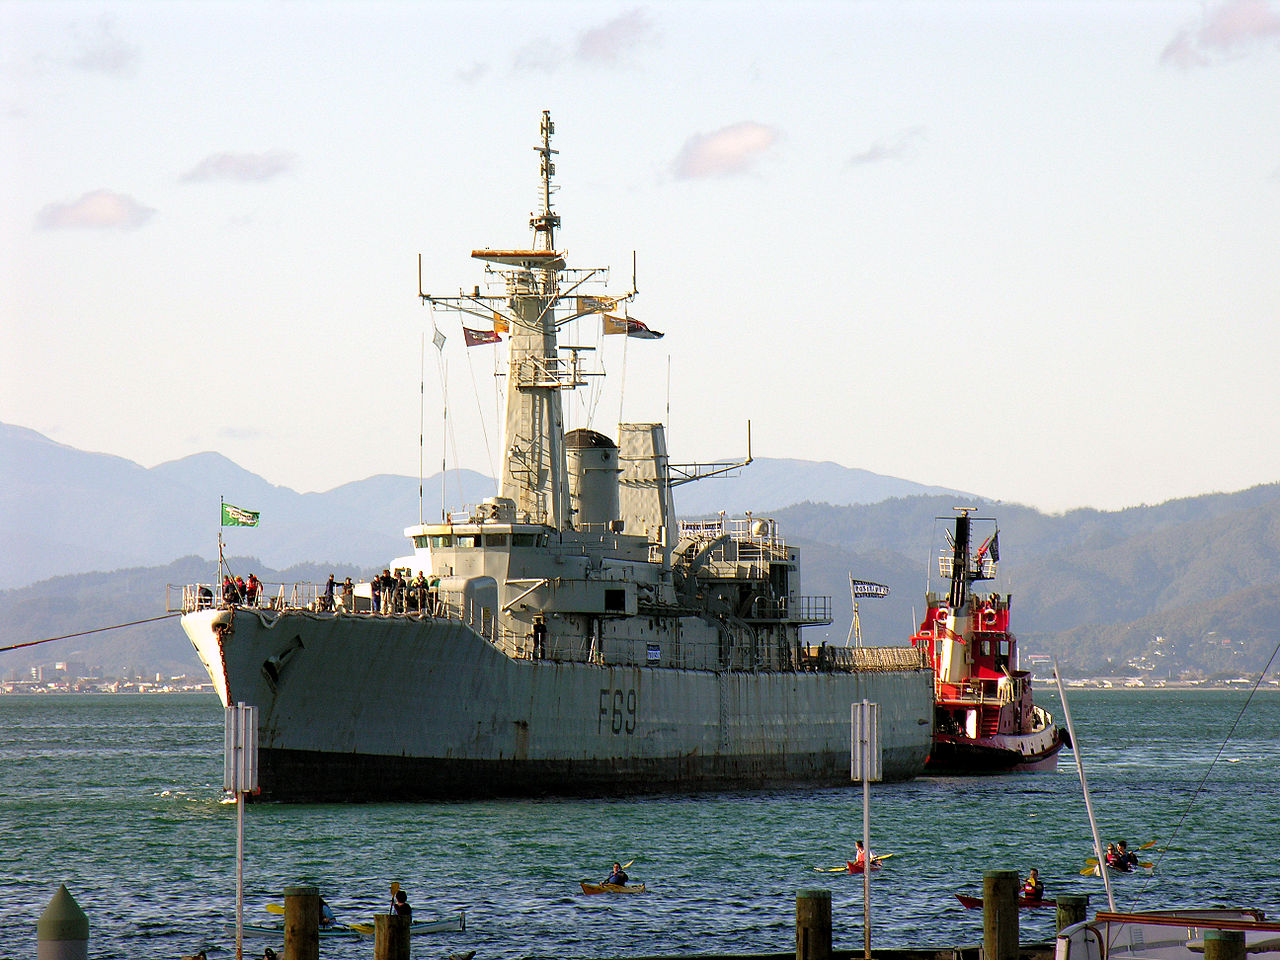 The F69 HMNZS Wellington wreck sits above the waters of New Zealand before being sunk off North Island